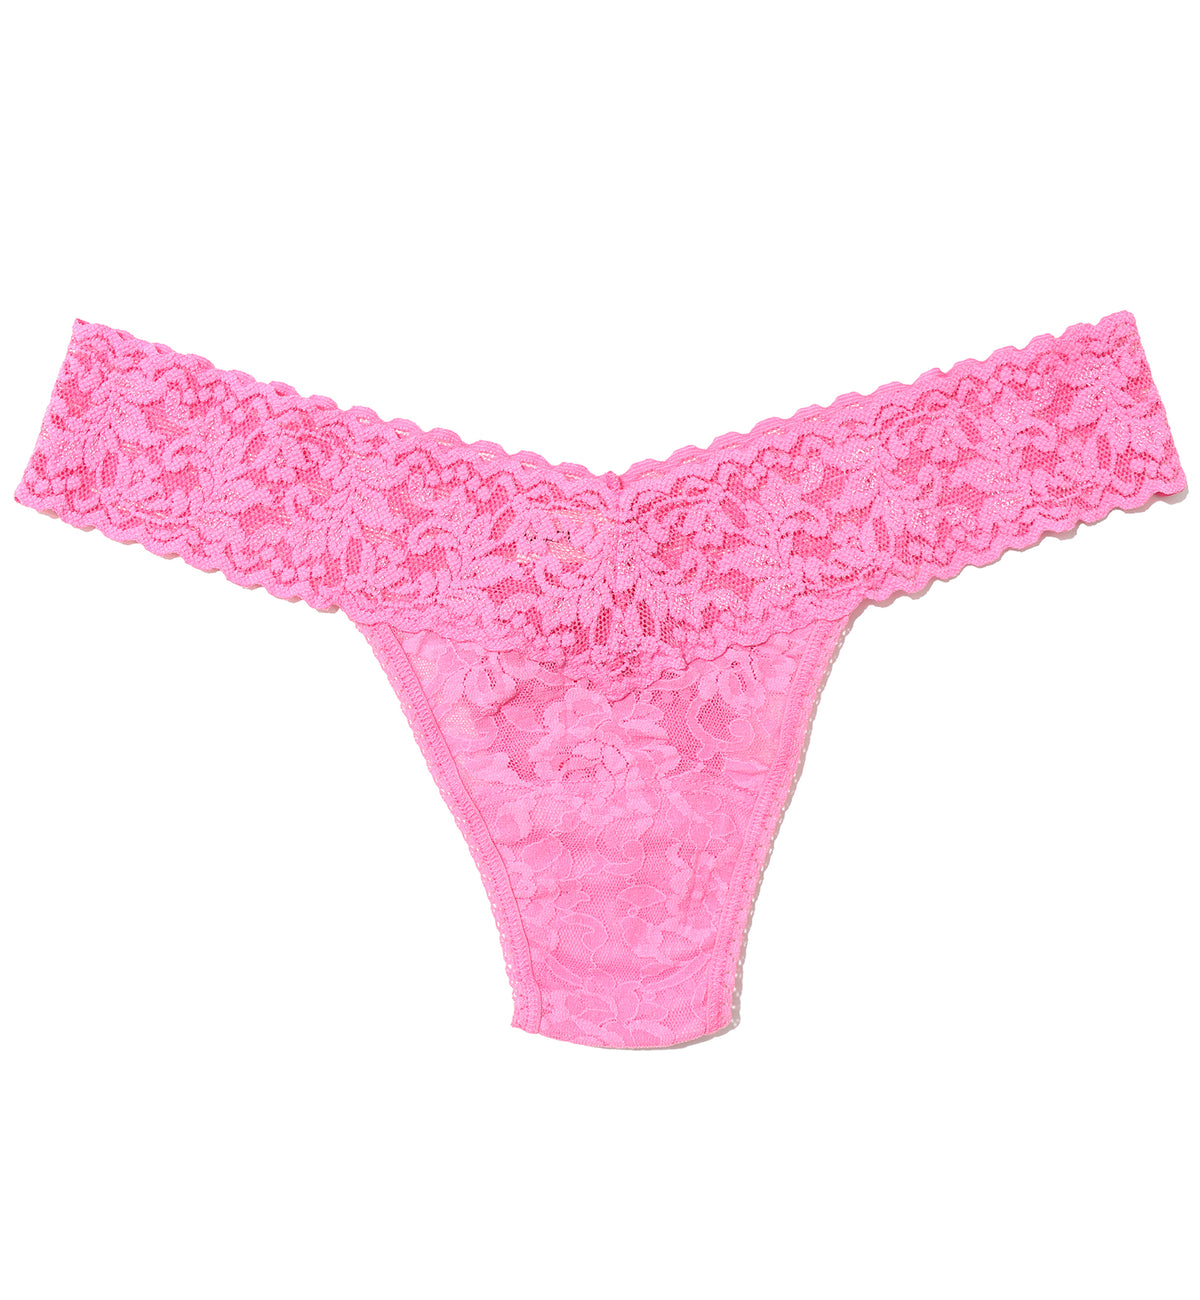 Hanky Panky Signature Lace Low Rise Thong (4911P),Taffy - Taffy,One Size